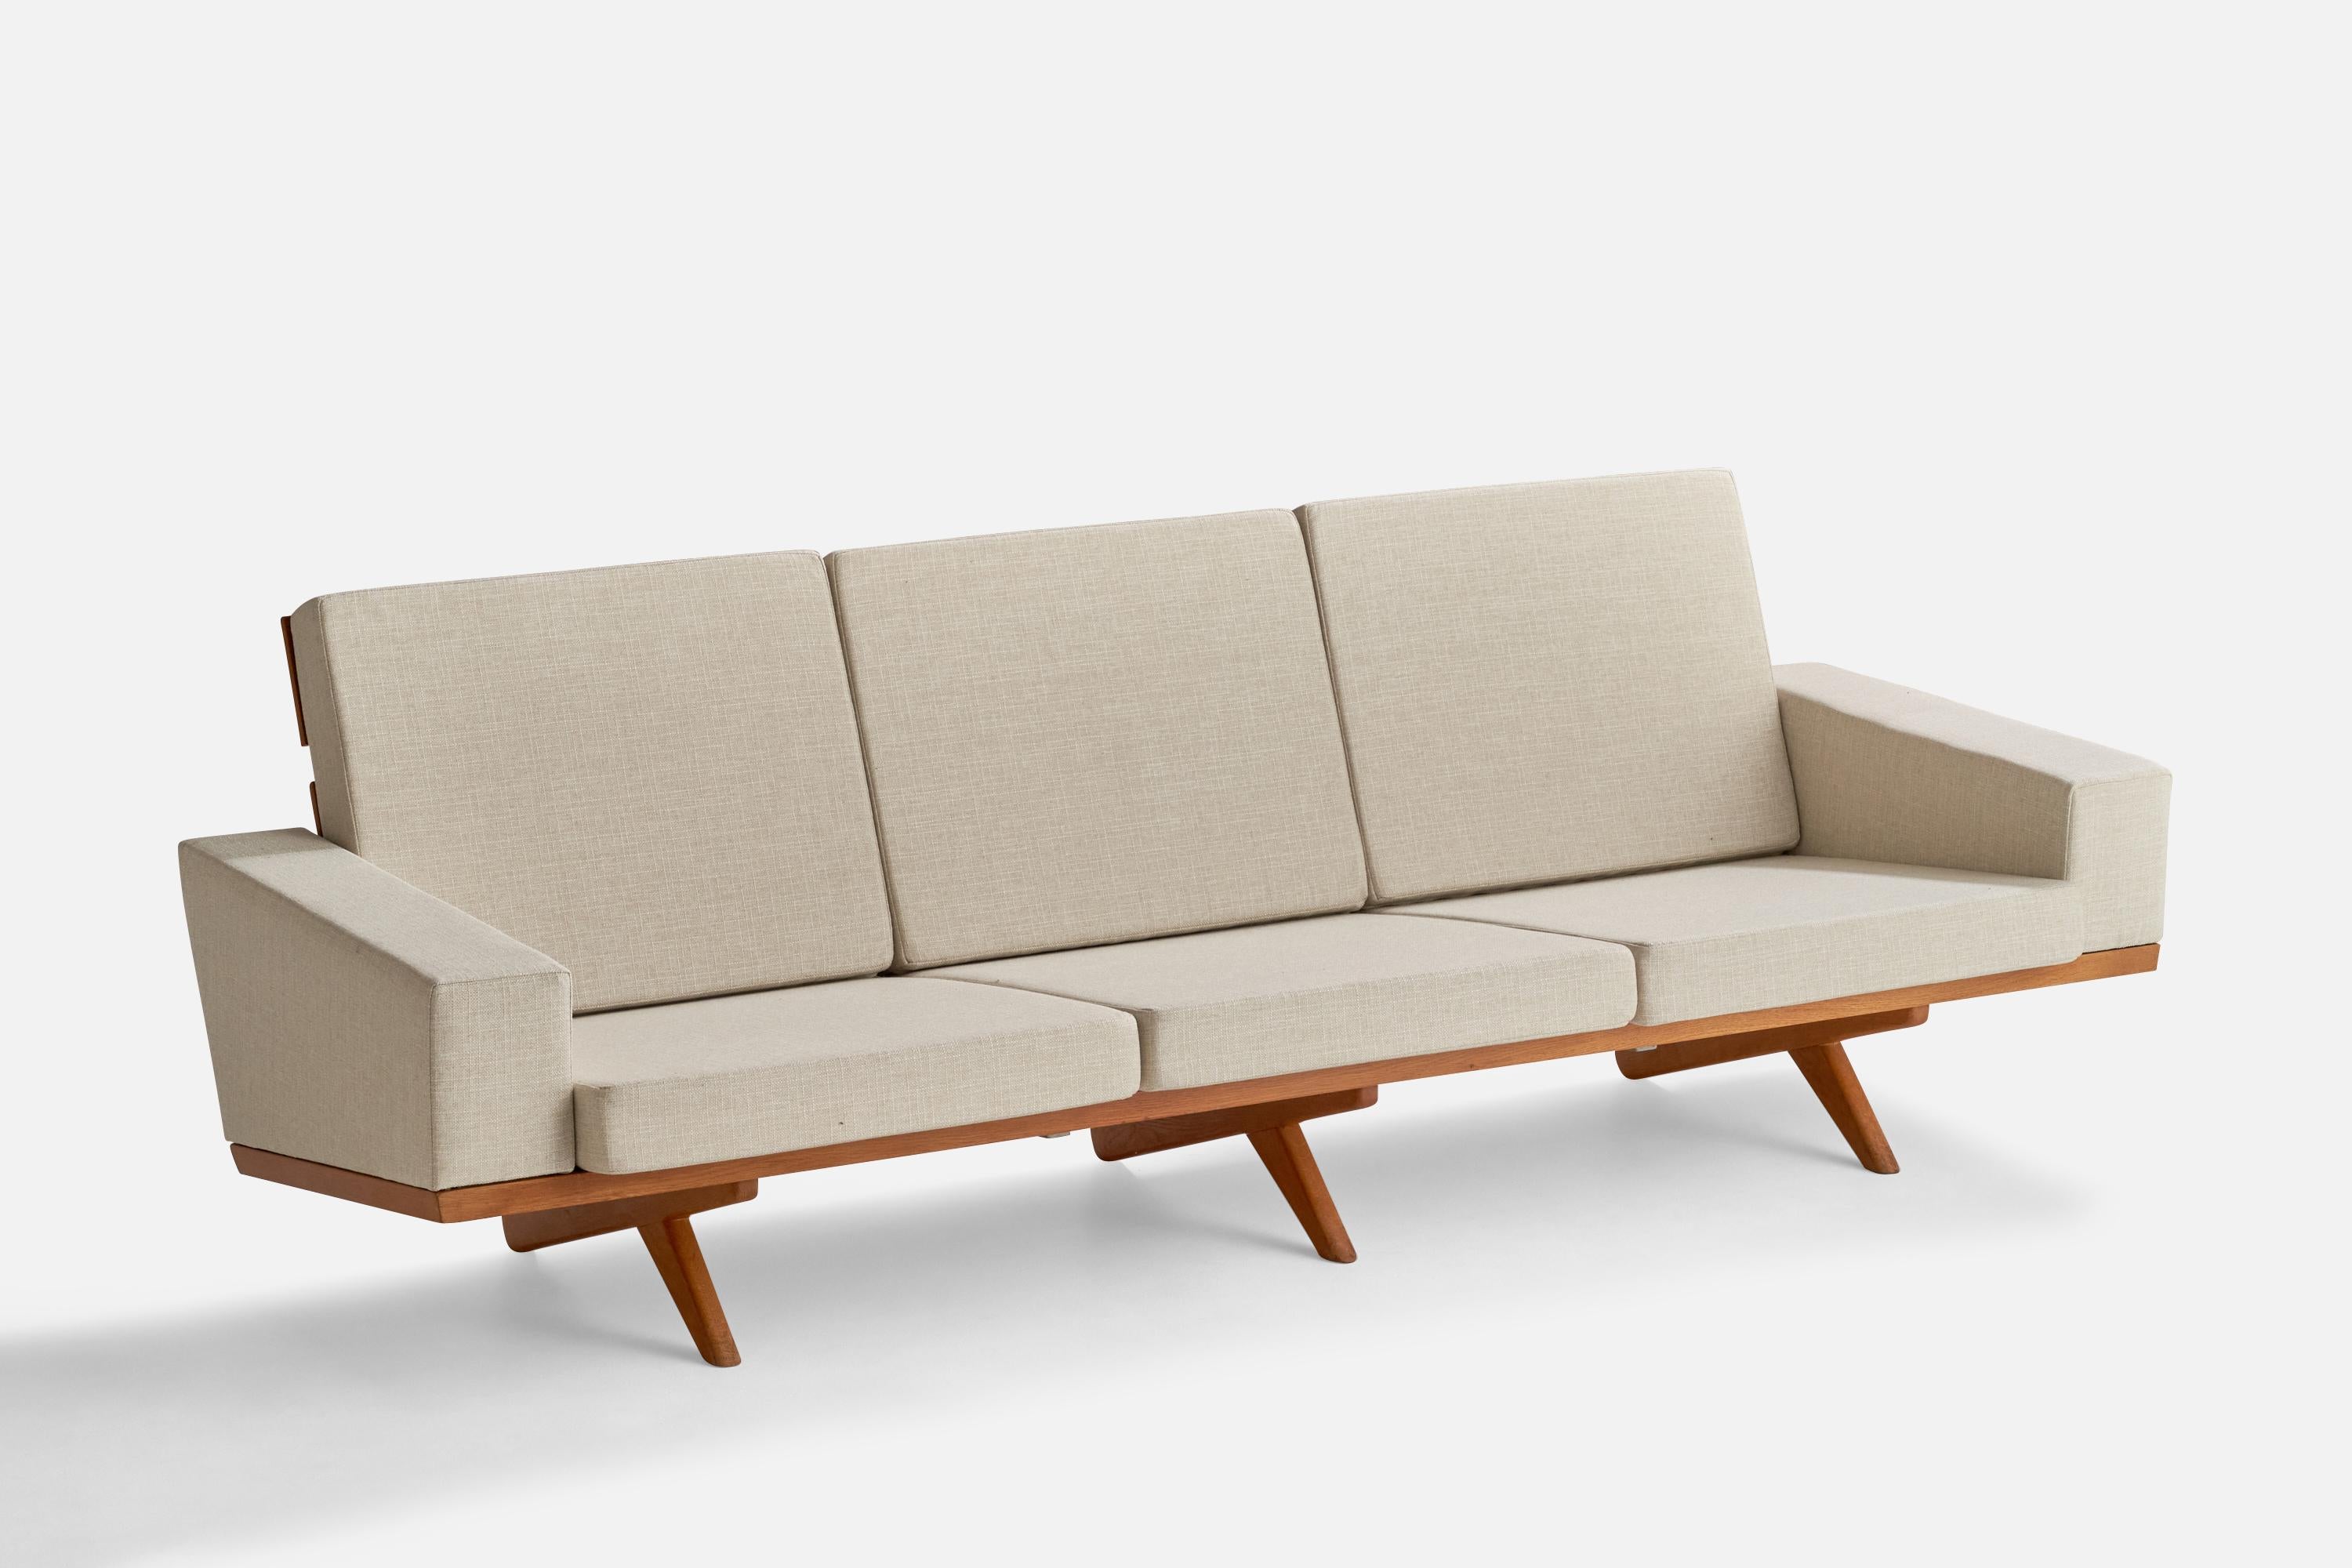 An oak and white fabric sofa designed by Georg Thams in 1964 and produced by Vejen Polstermøbelfabrik, Denmark, 1960s.

Seat height: 13.5”